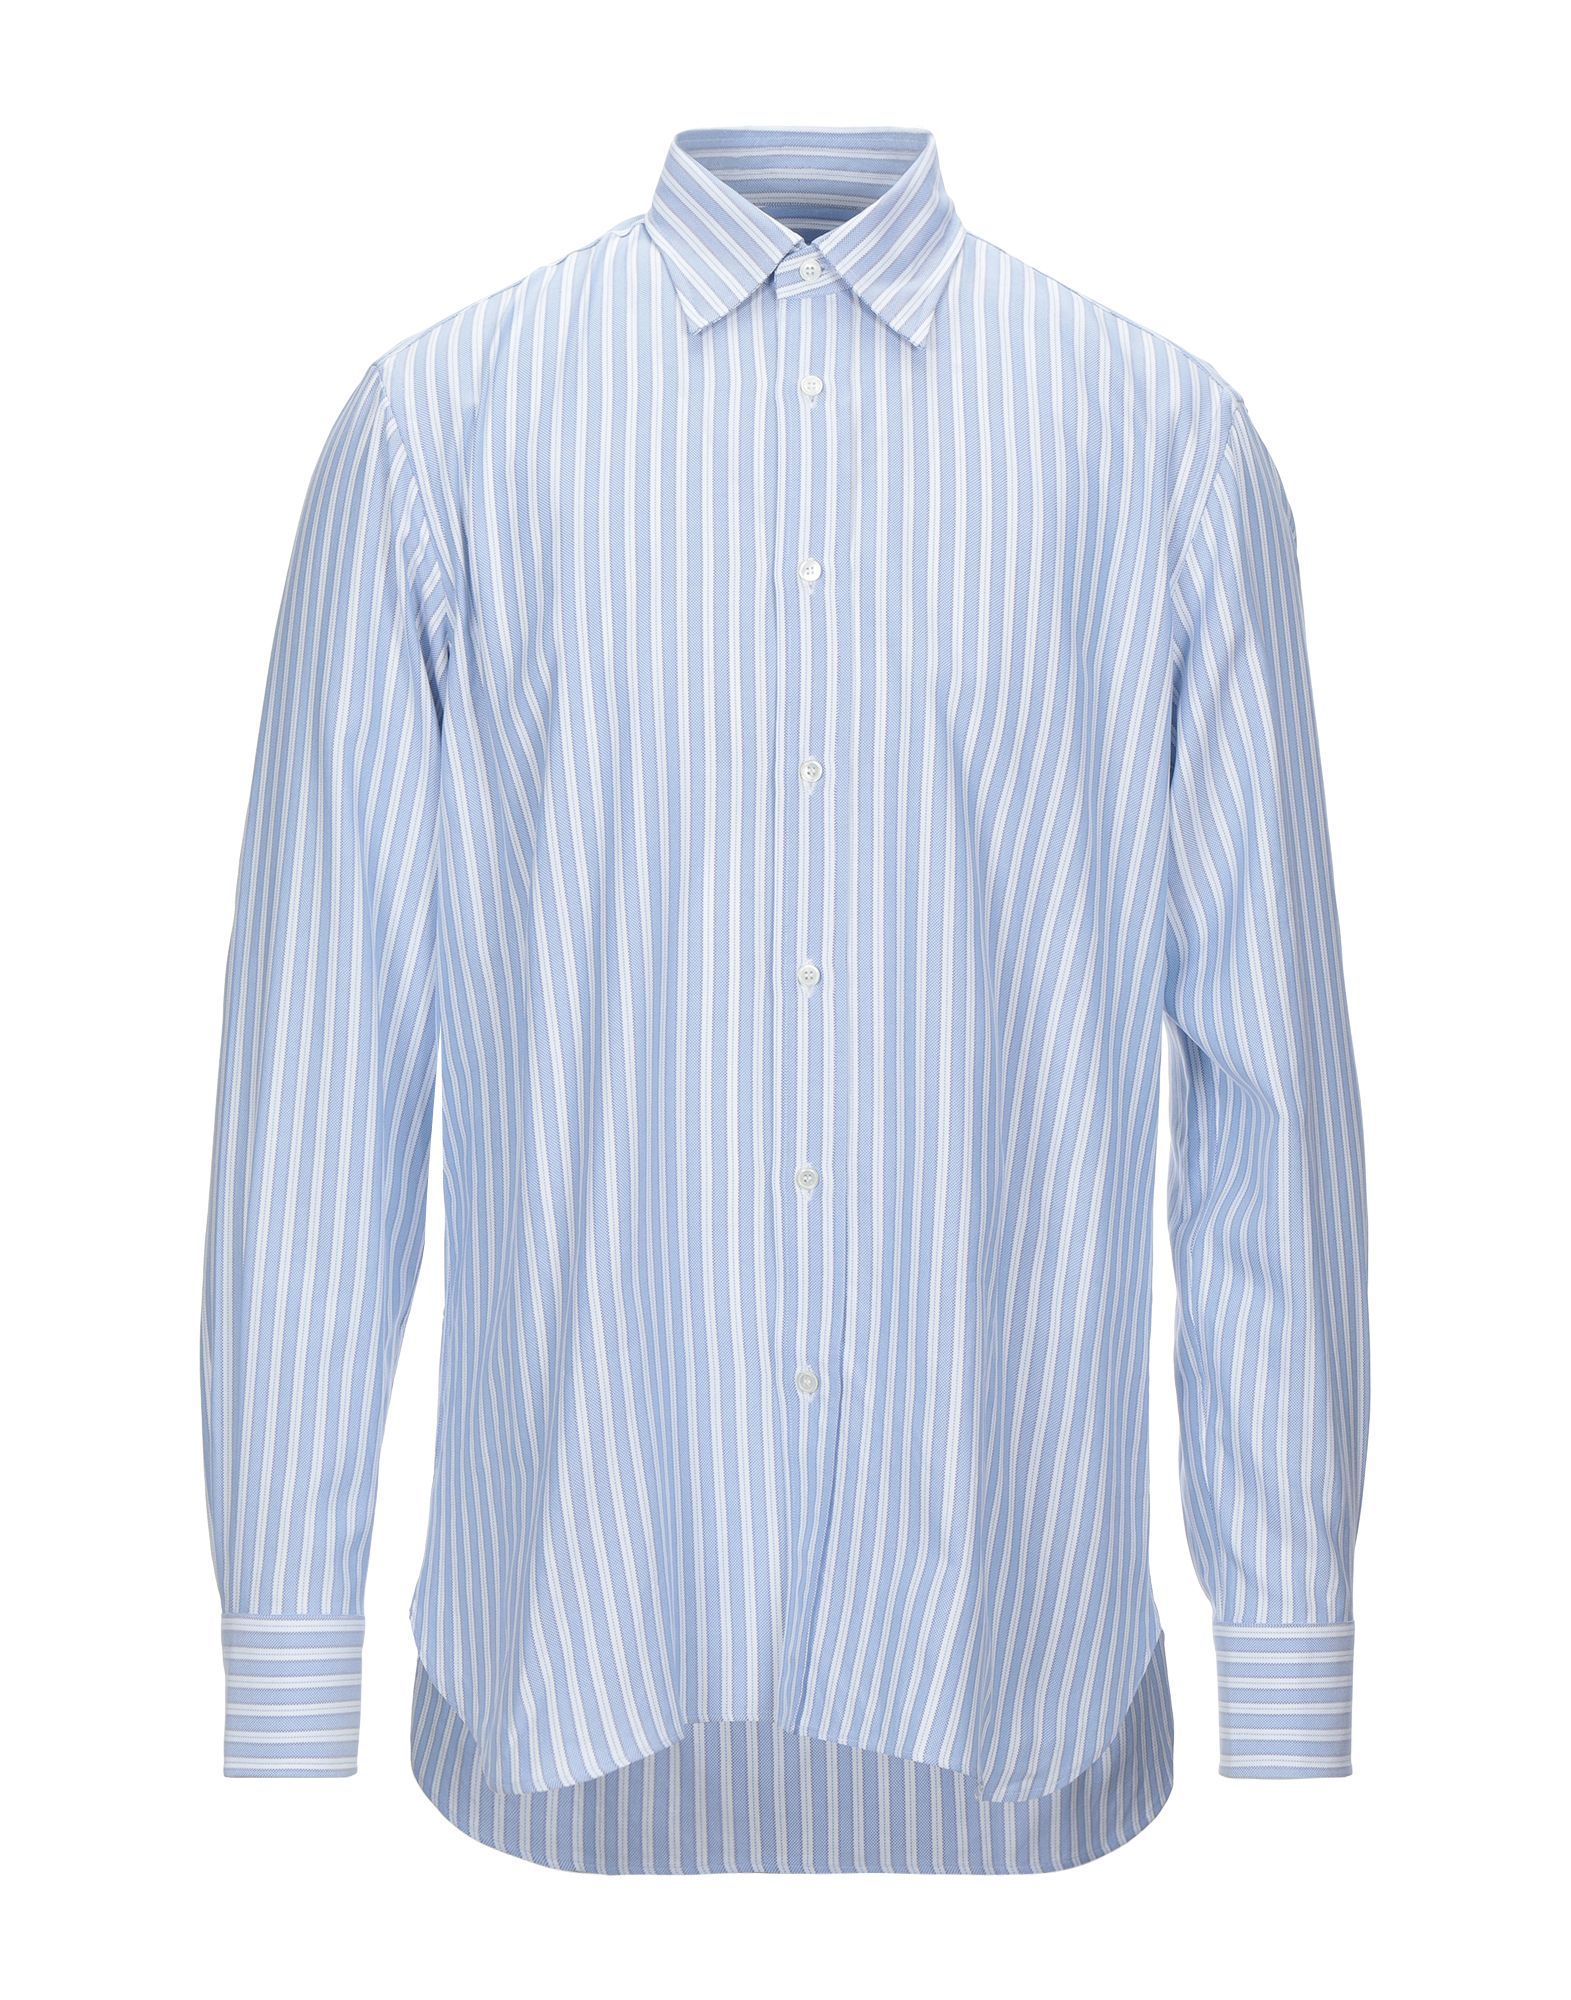 plain weave, logo, stripes, front closure, button closing, long sleeves, buttoned cuffs, classic neckline, no pockets